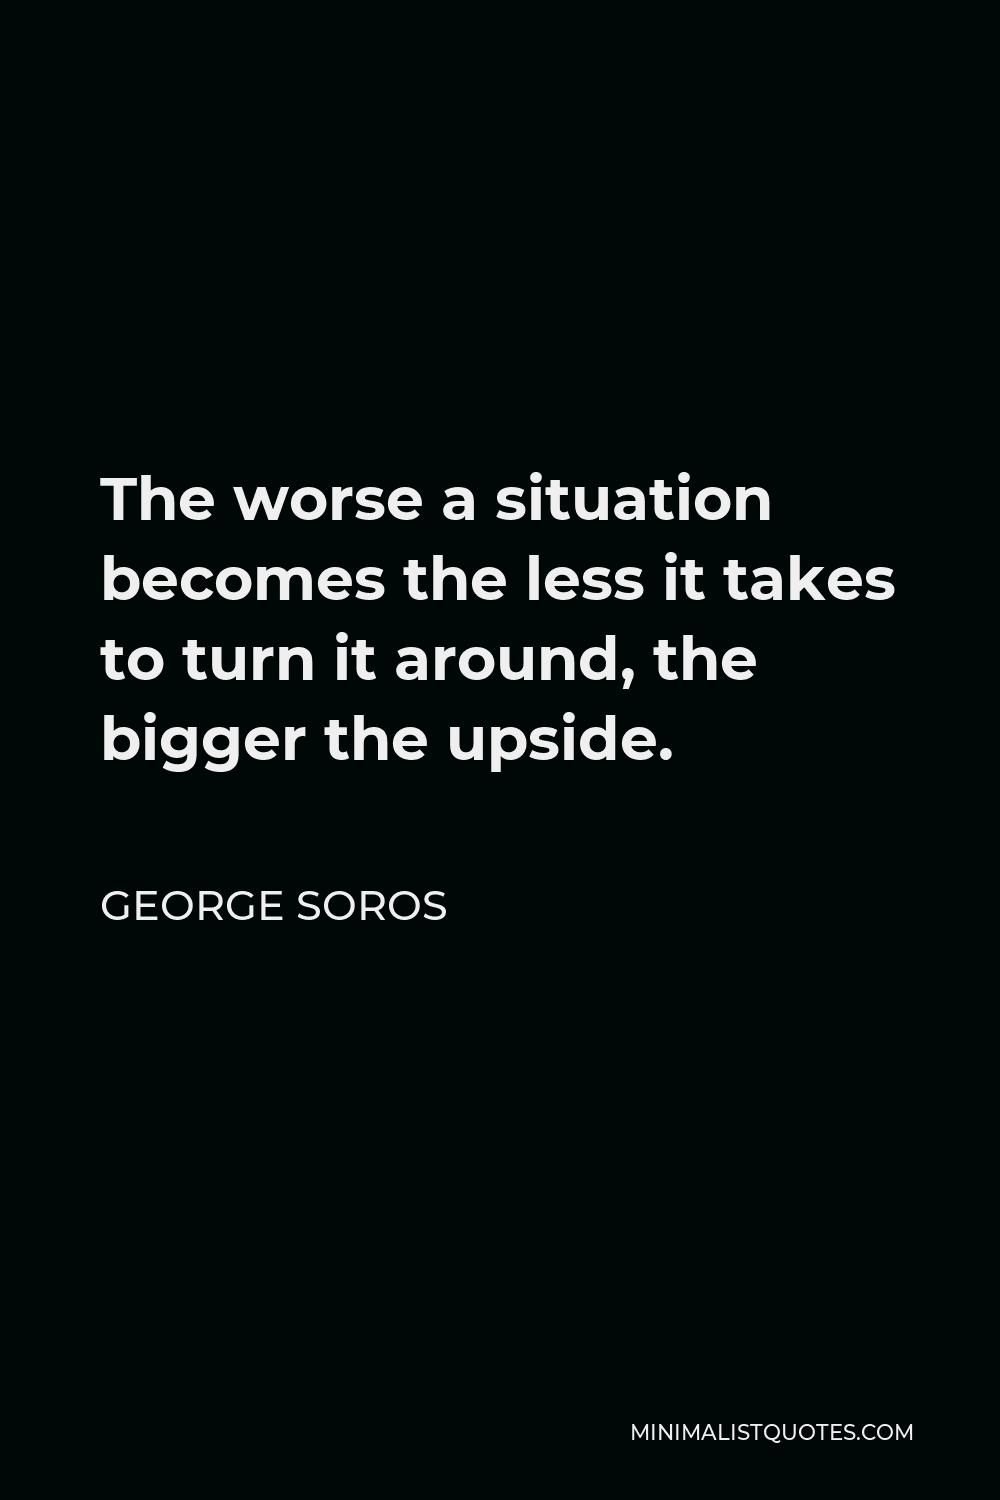 George Soros Quote - The worse a situation becomes the less it takes to turn it around, the bigger the upside.